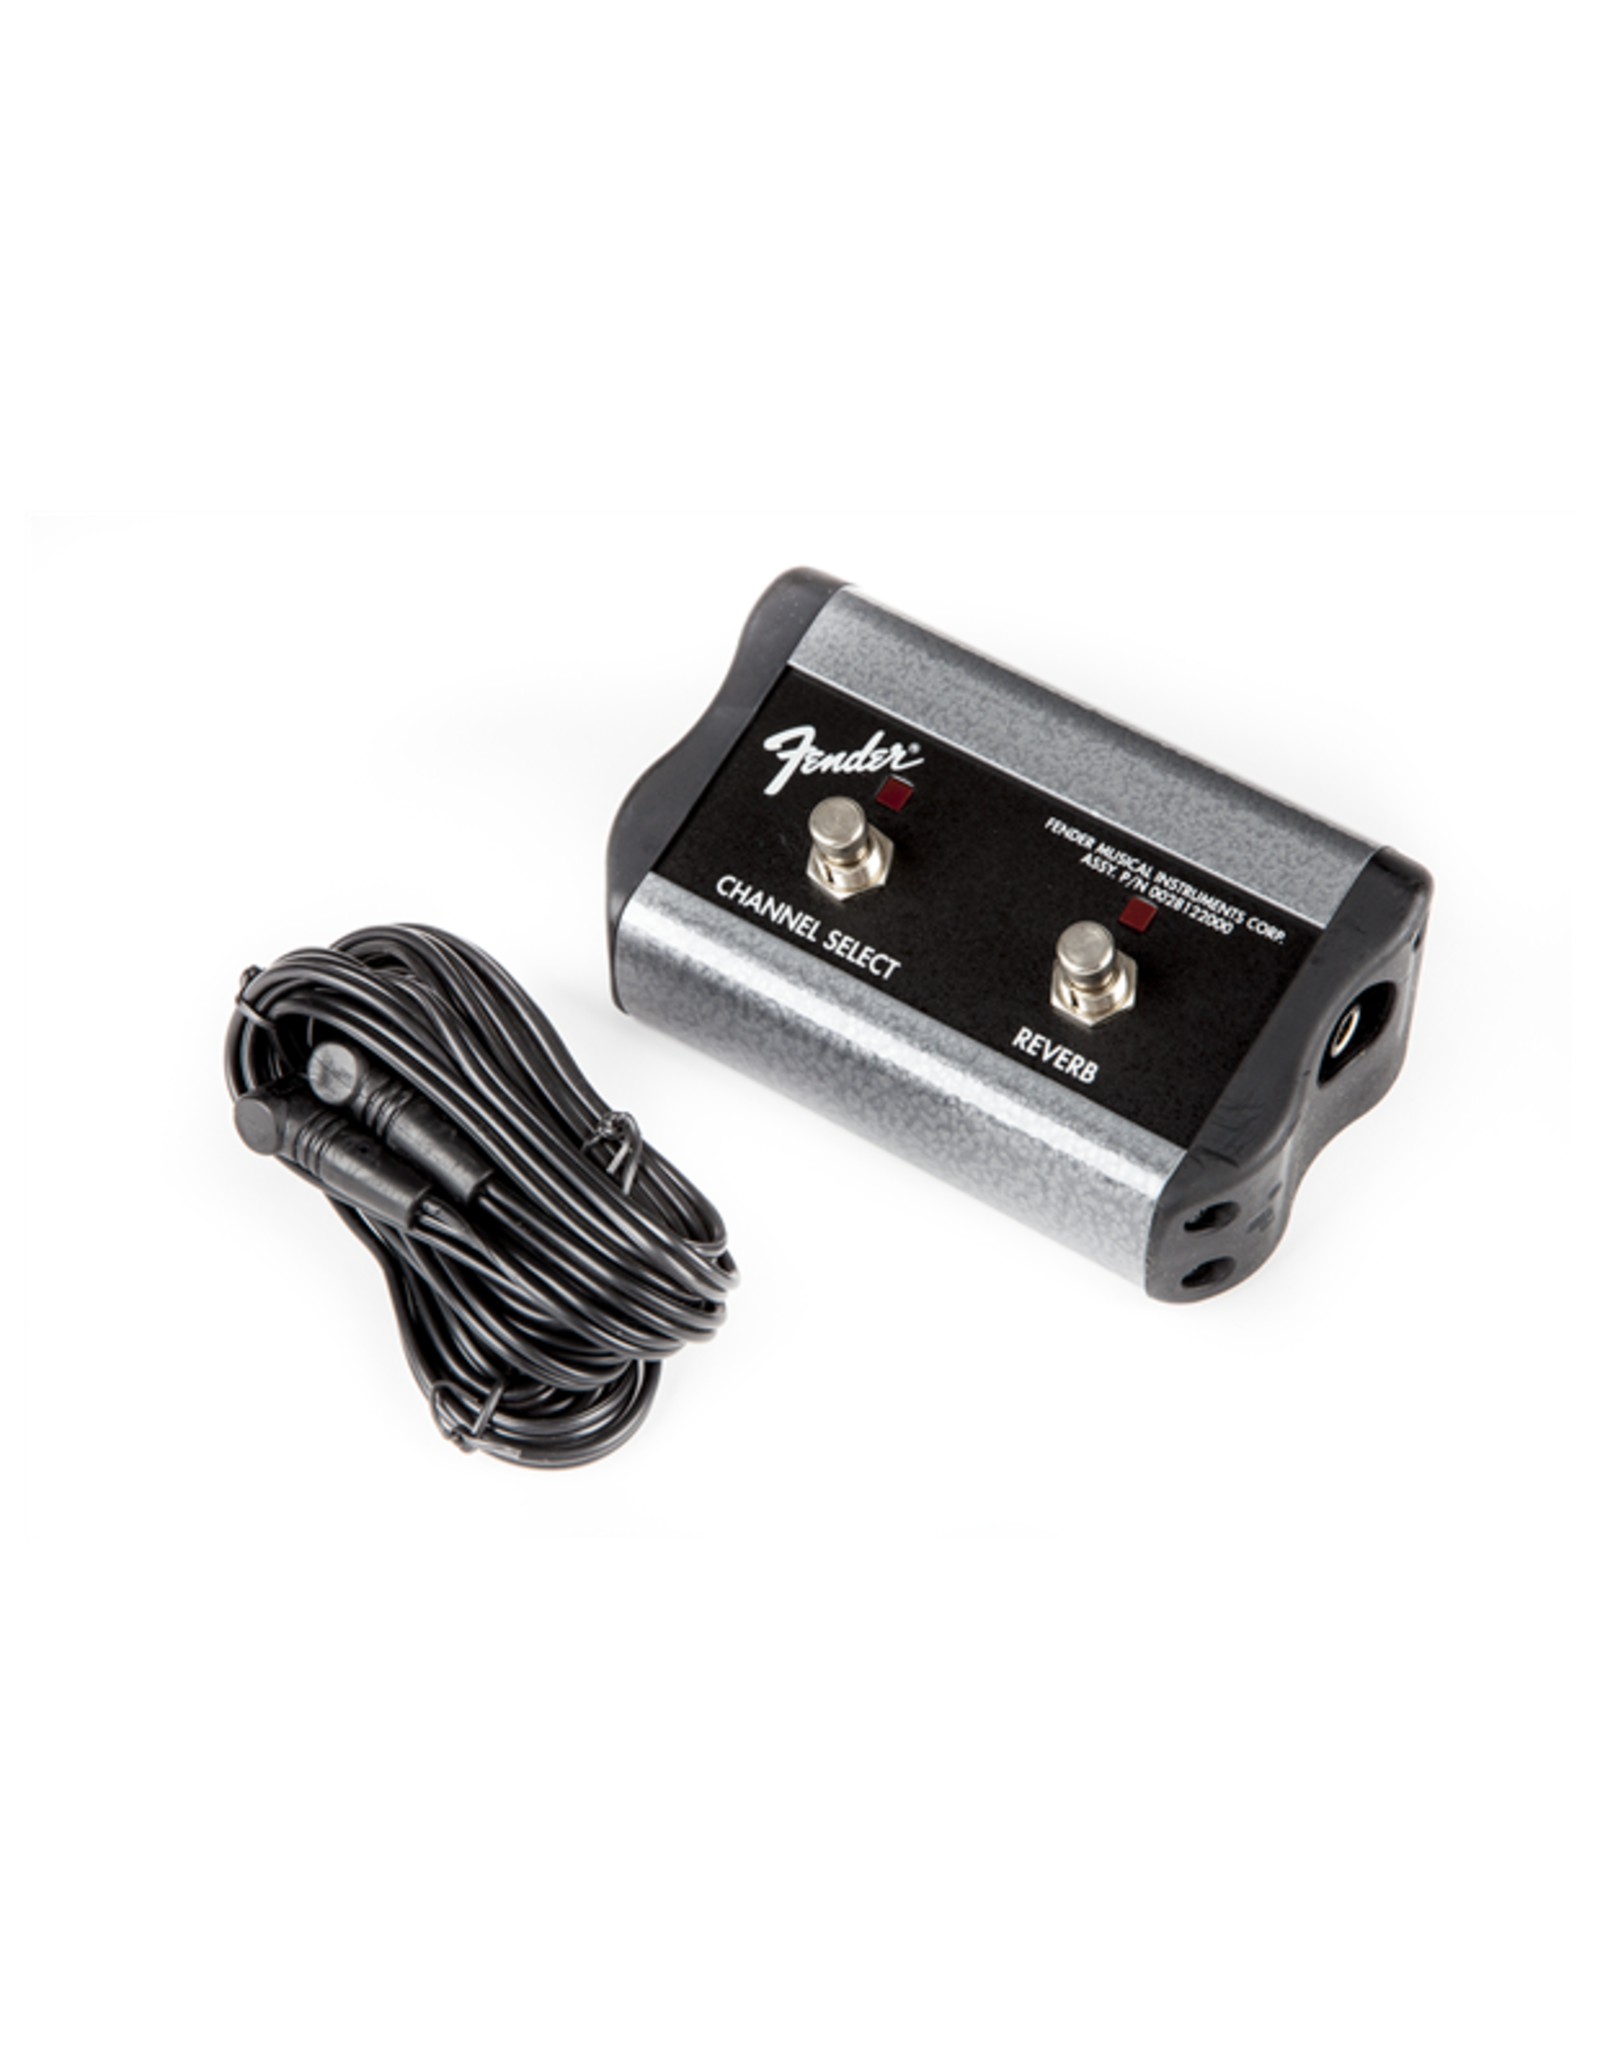 Fender Fender 2-Button Footswitch: Channel / Reverb On/Off with 1/4" Jack